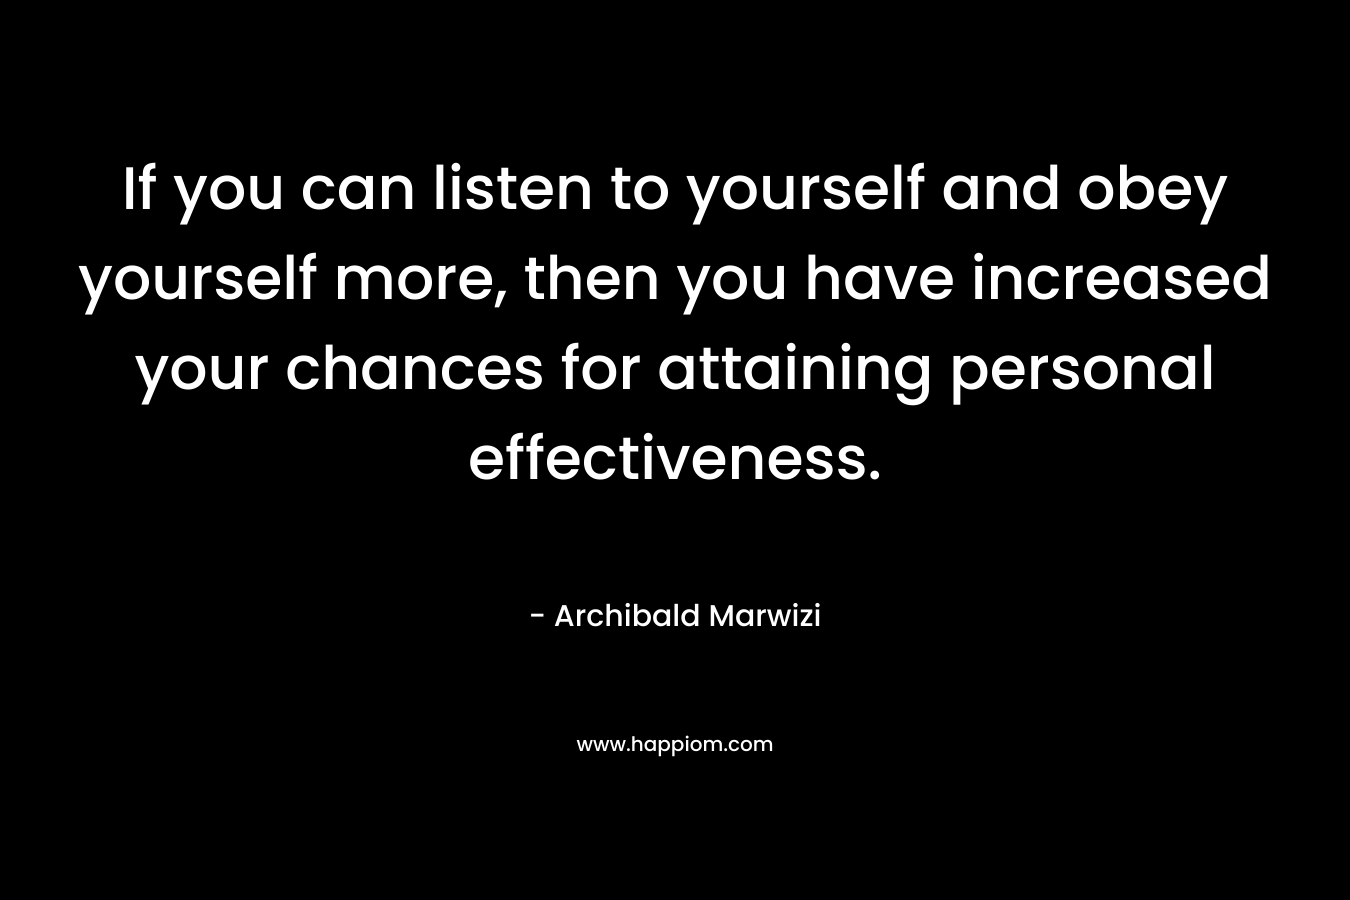 If you can listen to yourself and obey yourself more, then you have increased your chances for attaining personal effectiveness. – Archibald Marwizi